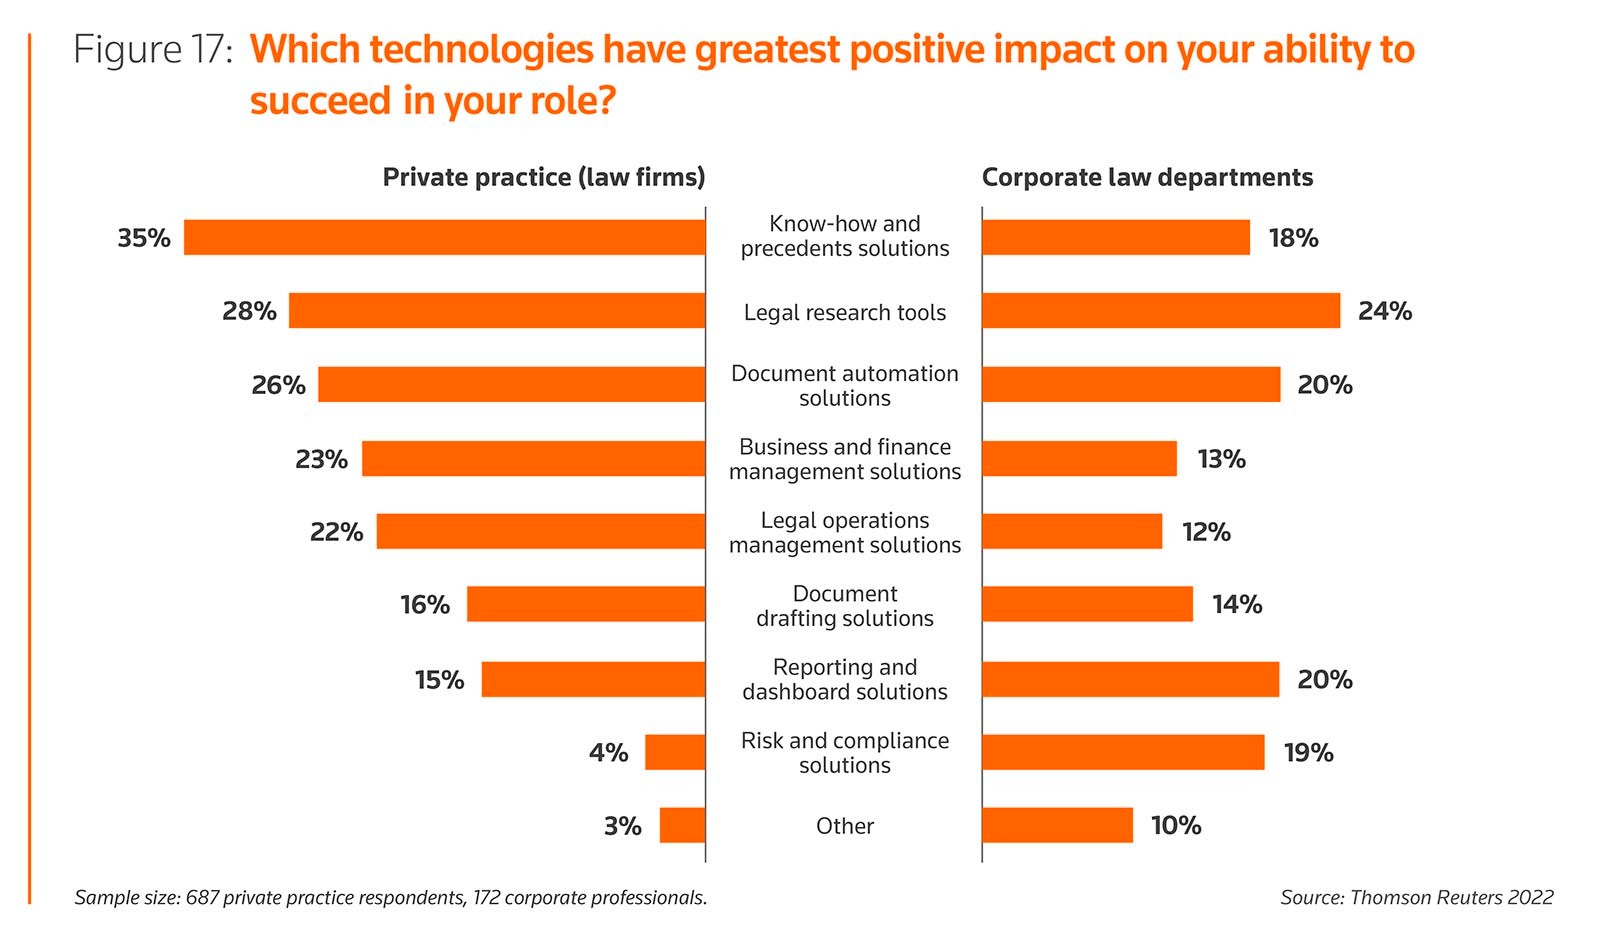 Which technologies have the greatest positive impact on your ability to succeed in your role?